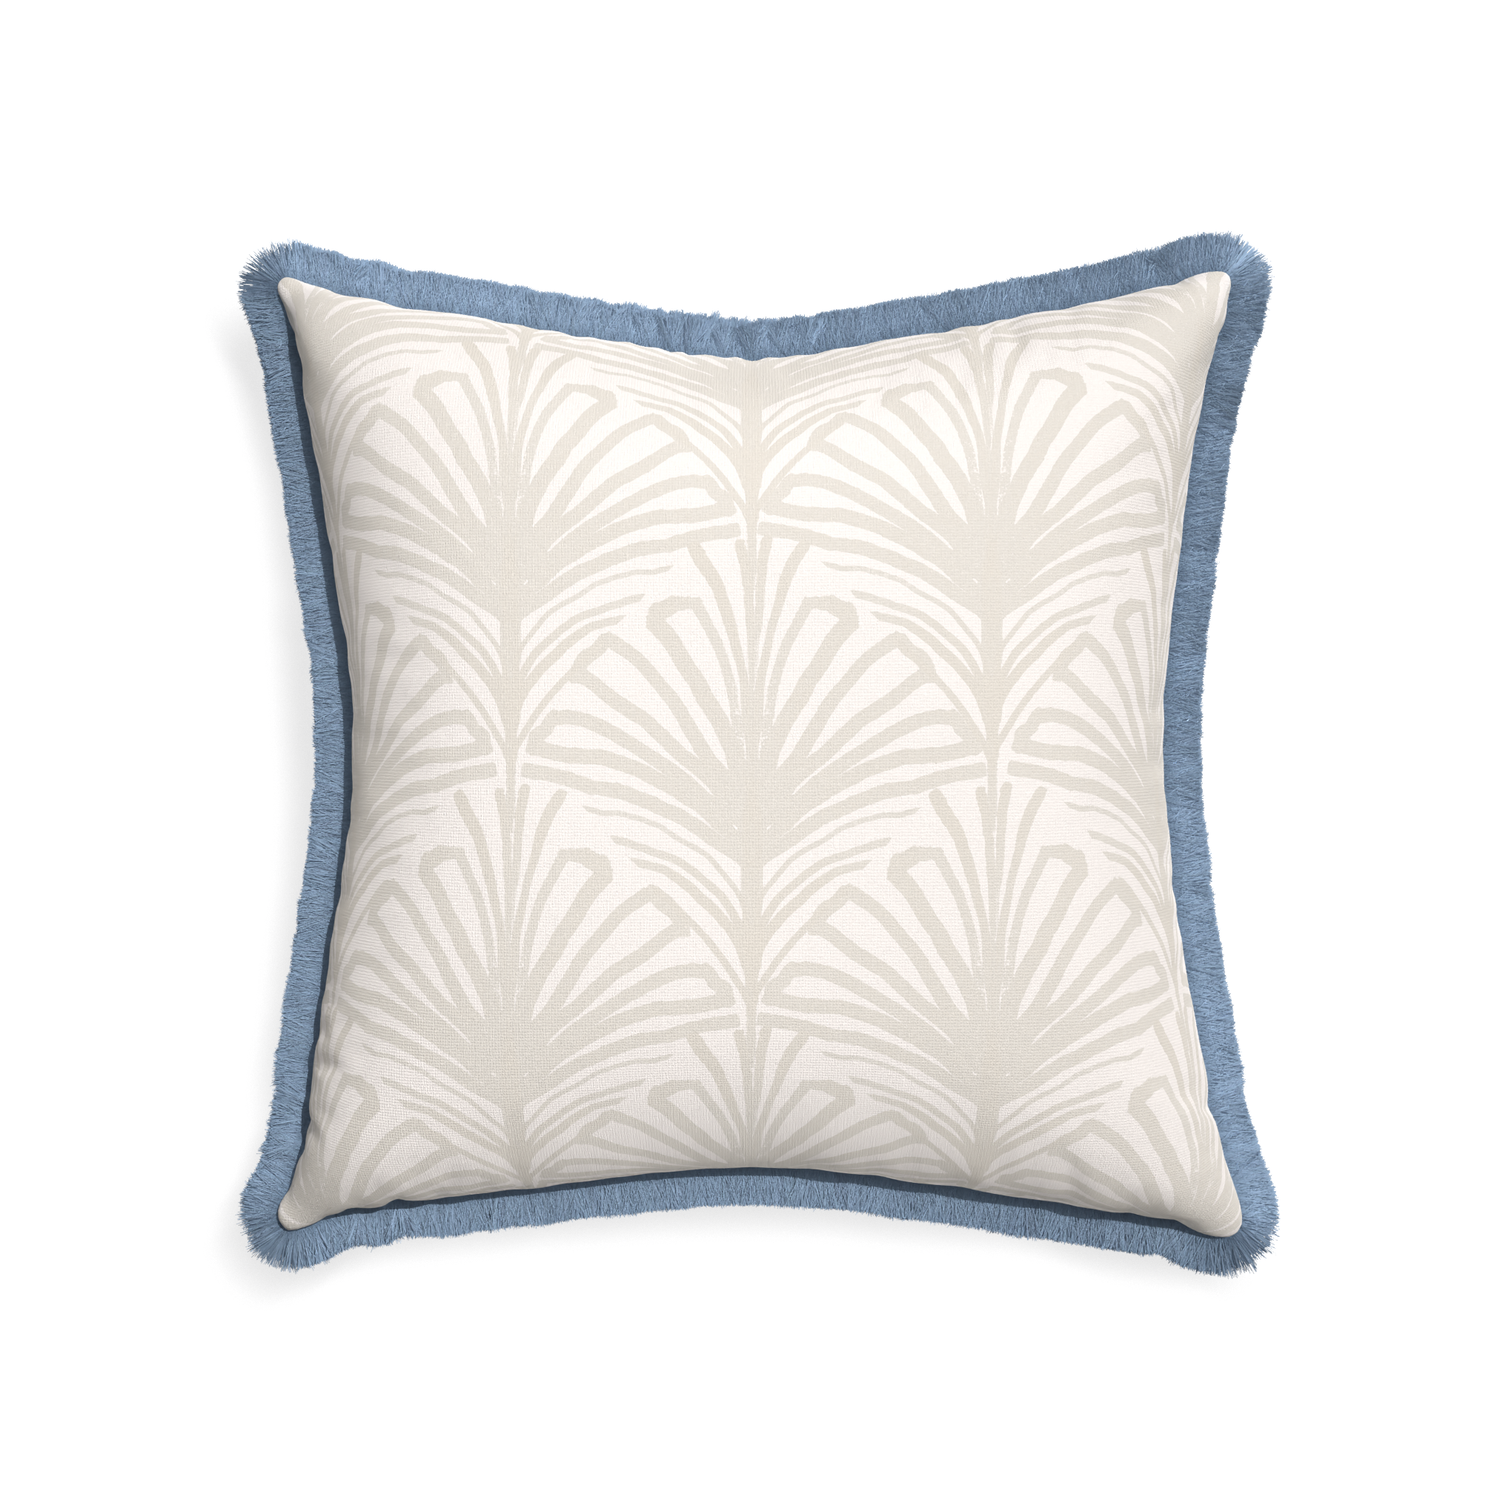 22-square suzy sand custom pillow with sky fringe on white background